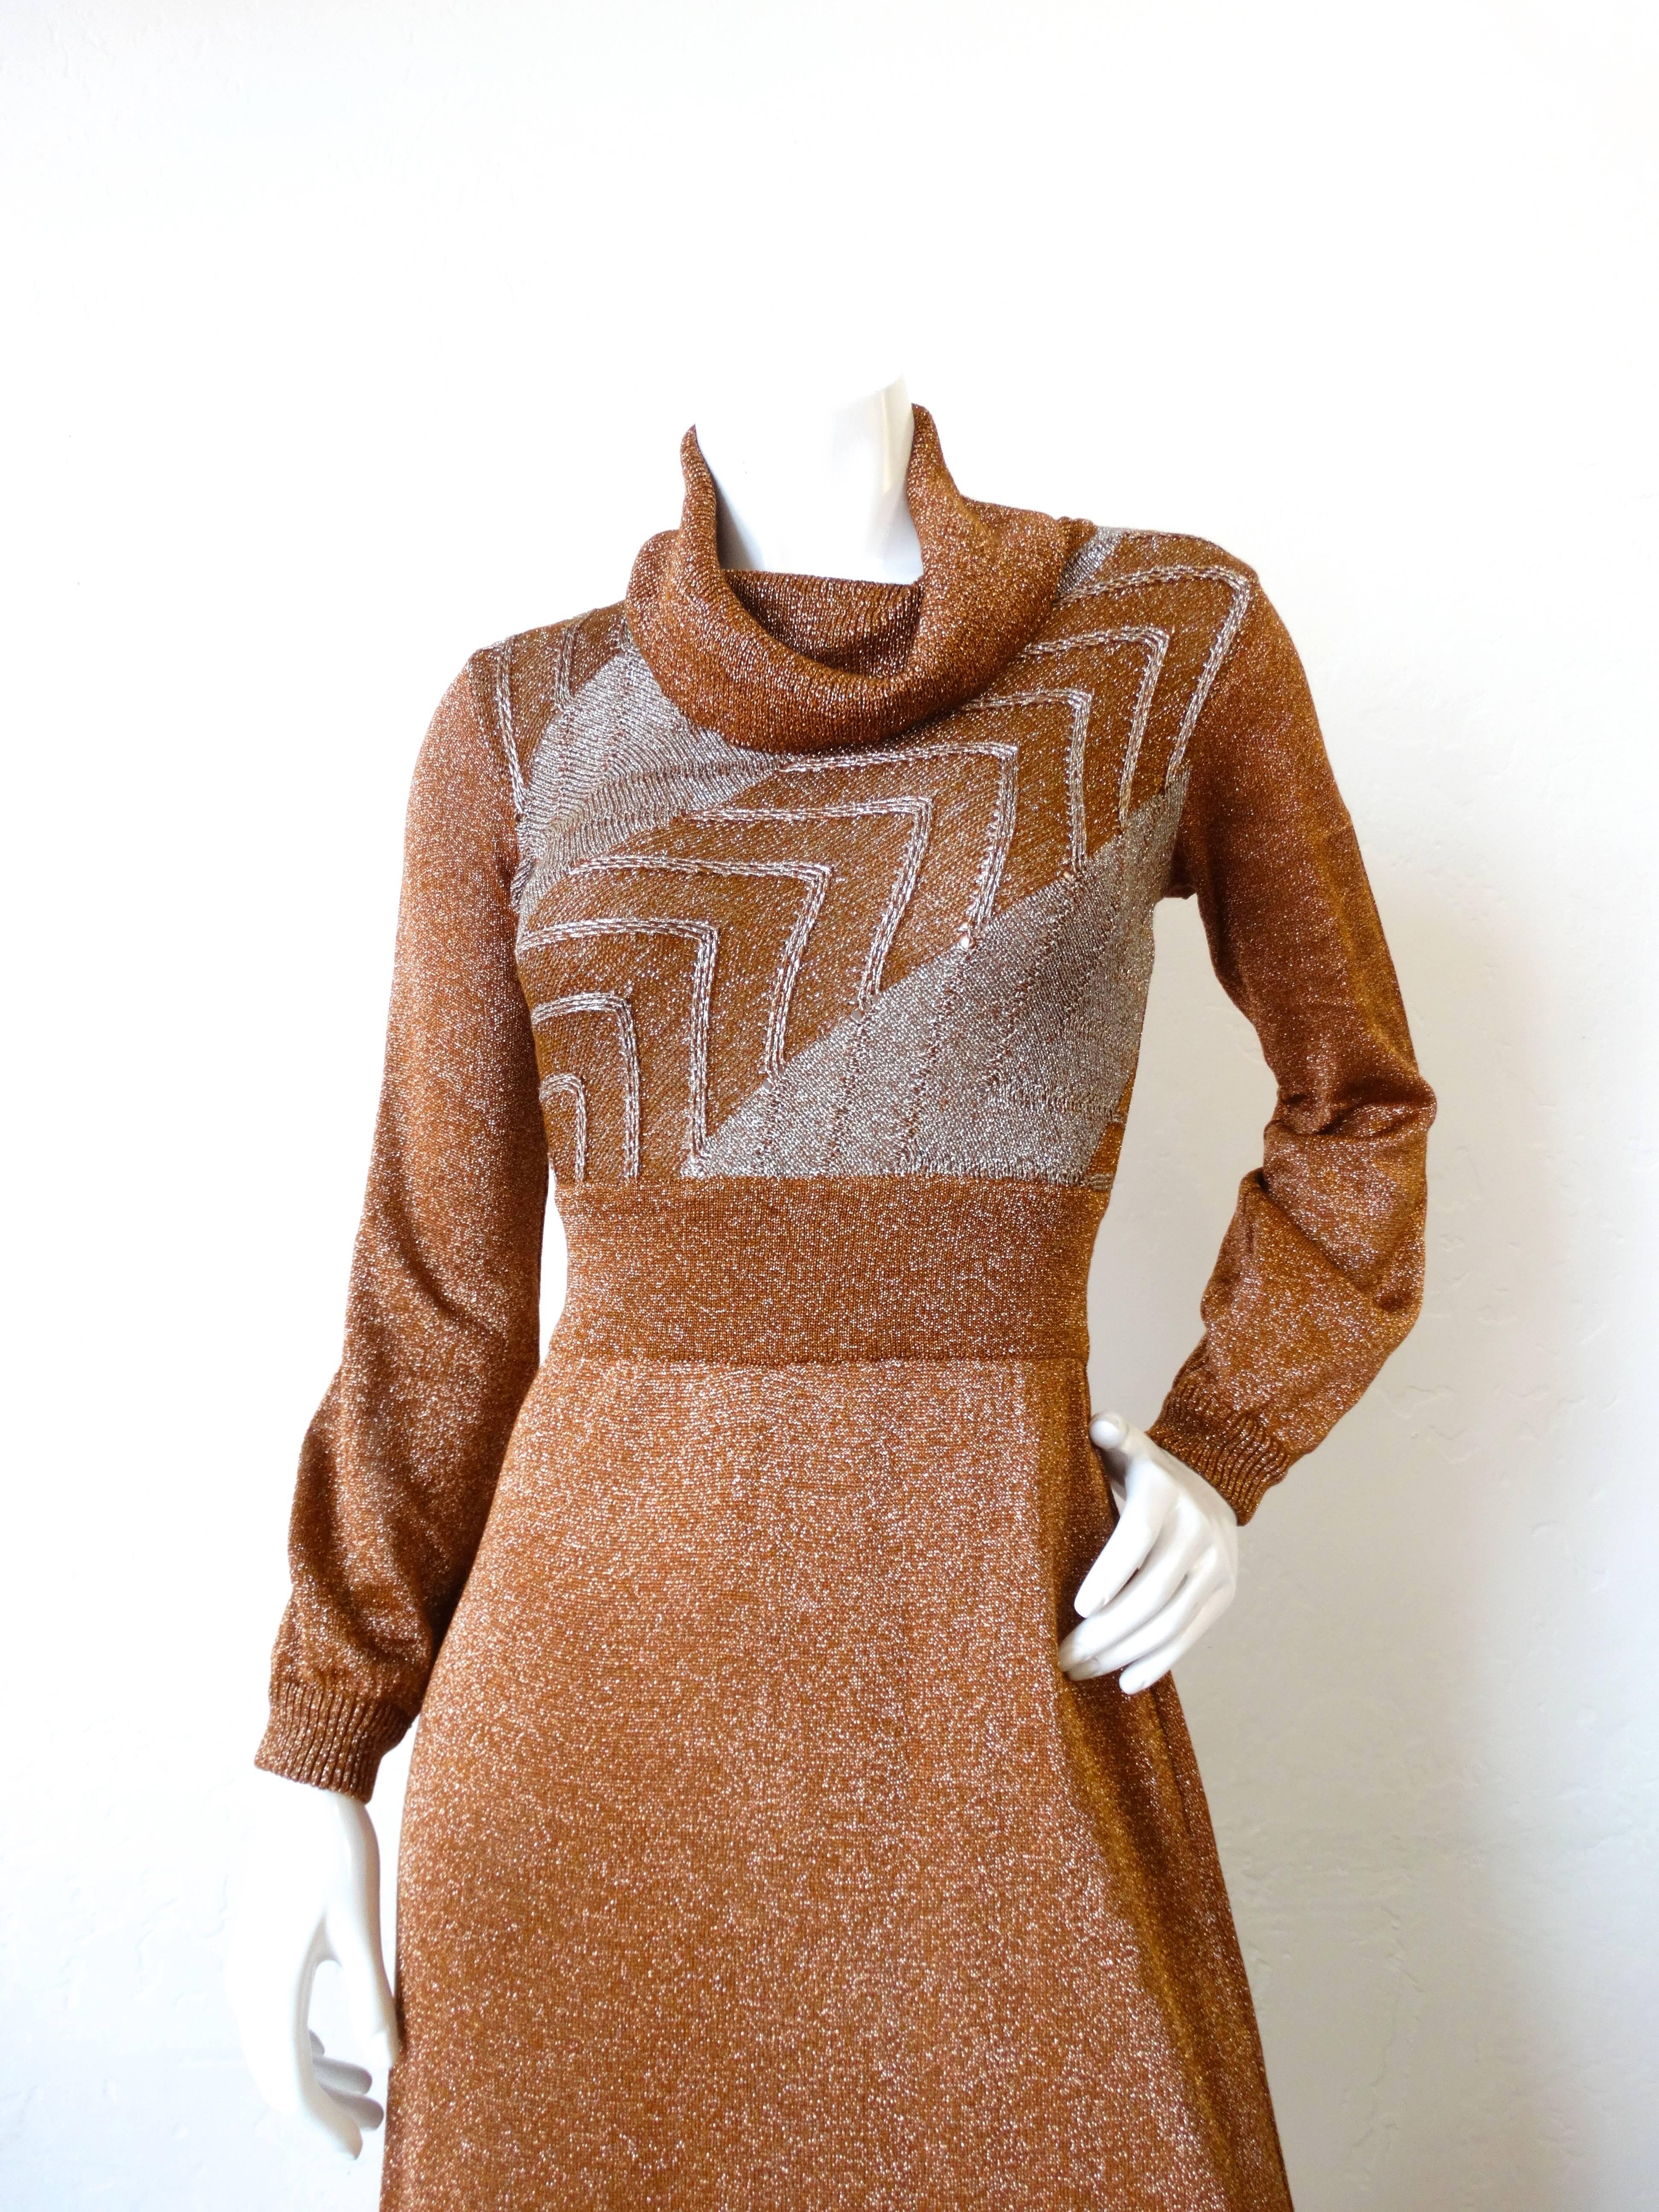 Rock some 1970s goodness this holiday season with our Wenjilli gown! Made of a super metallic lurex knit fabric in shades of silver and bronze. Chevron stripe pattern on the bodice with a banded waist. Gathered turtleneck-like neckline. Sleeves